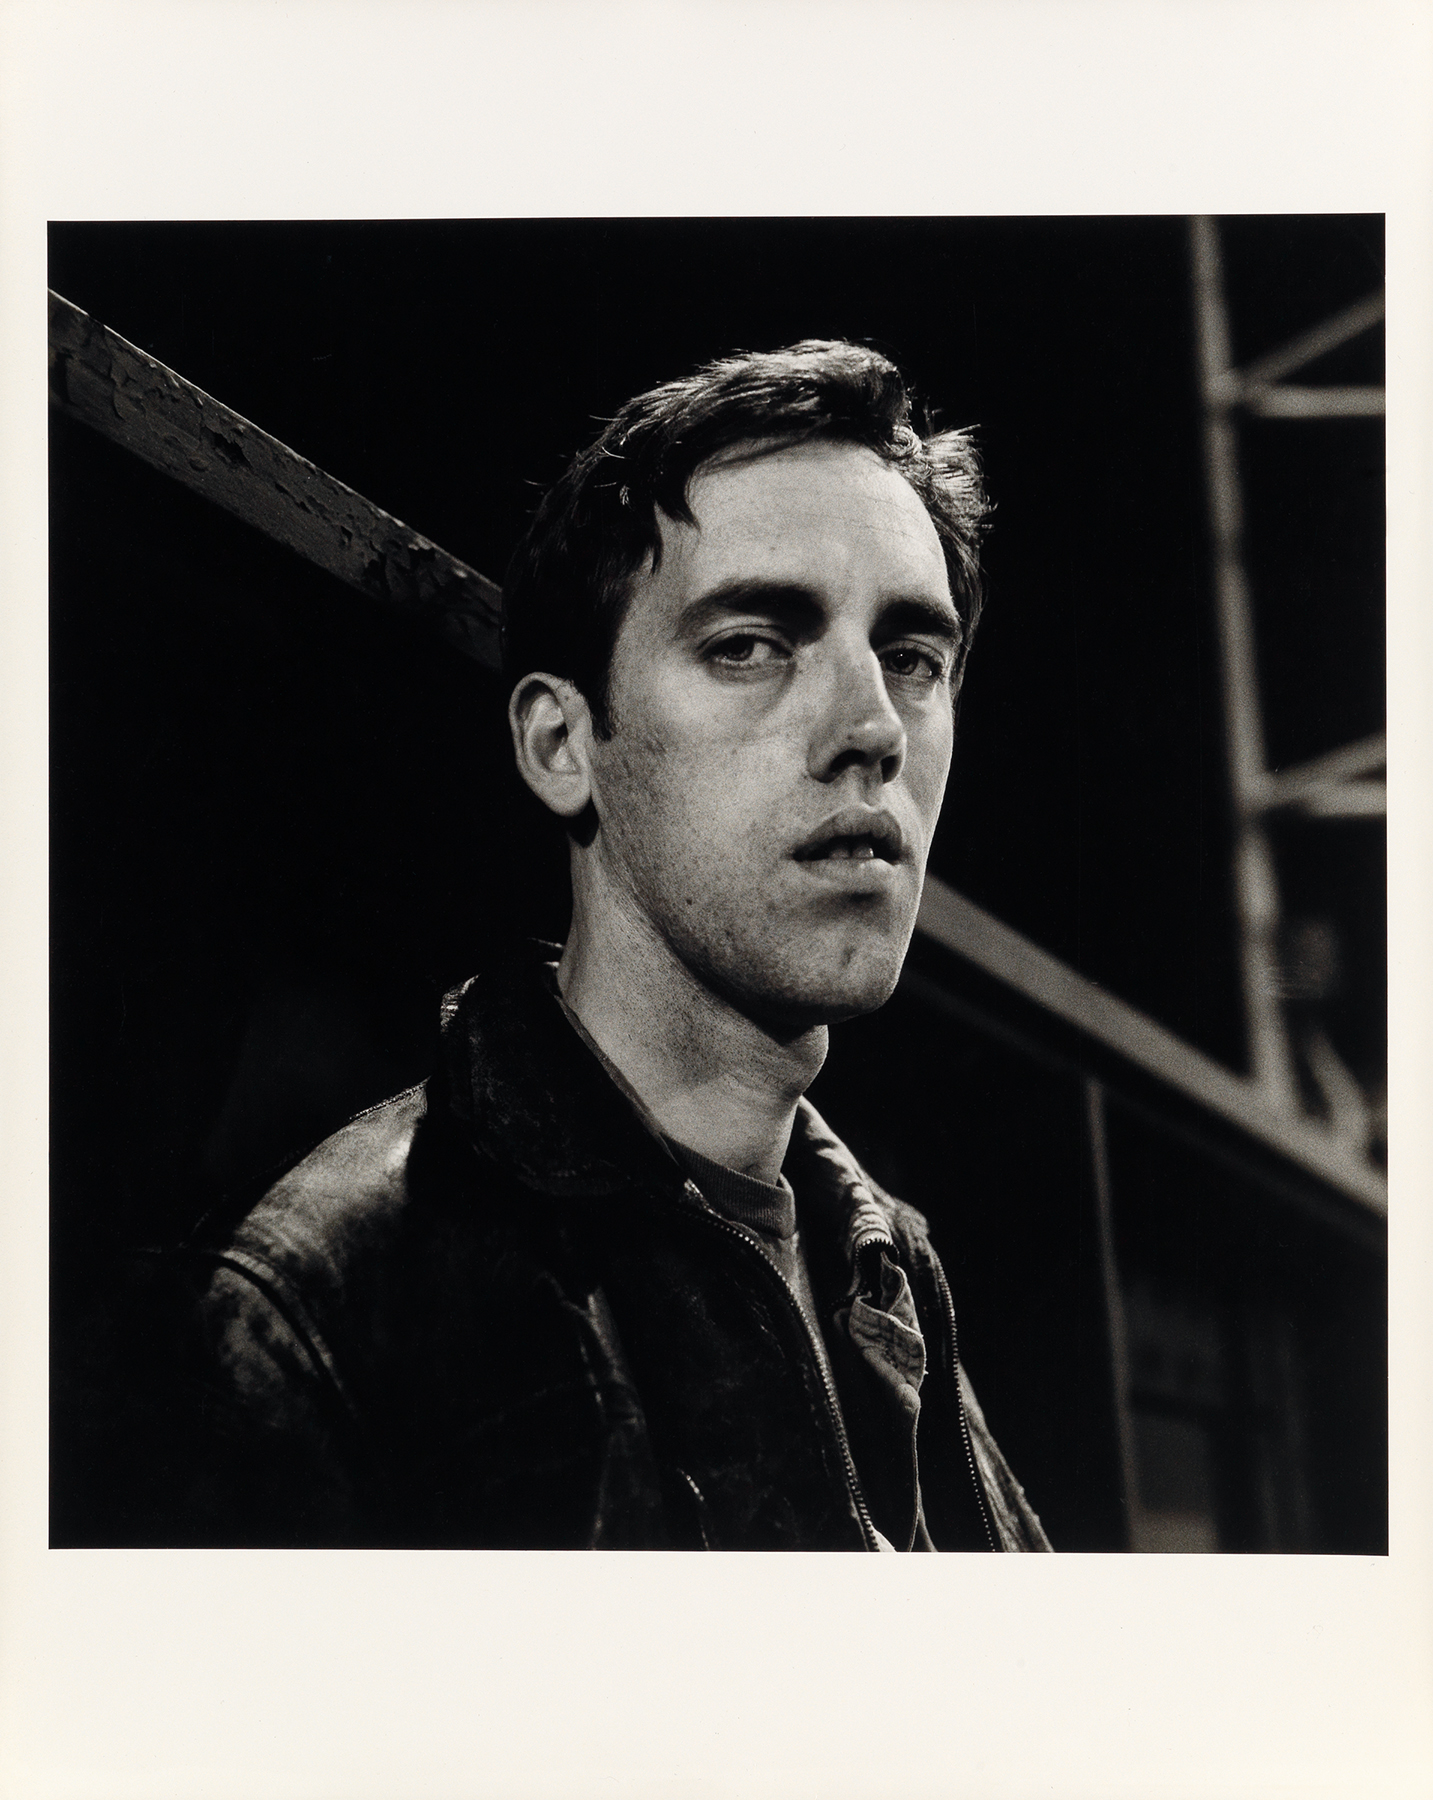 Peter Hujar's black and white print, David Wojnarowicz: Manhattan-Night (III), features his friend and mentee. David Wojnarowicz, looking directly at the camera with a moody, faintly sultry expression.